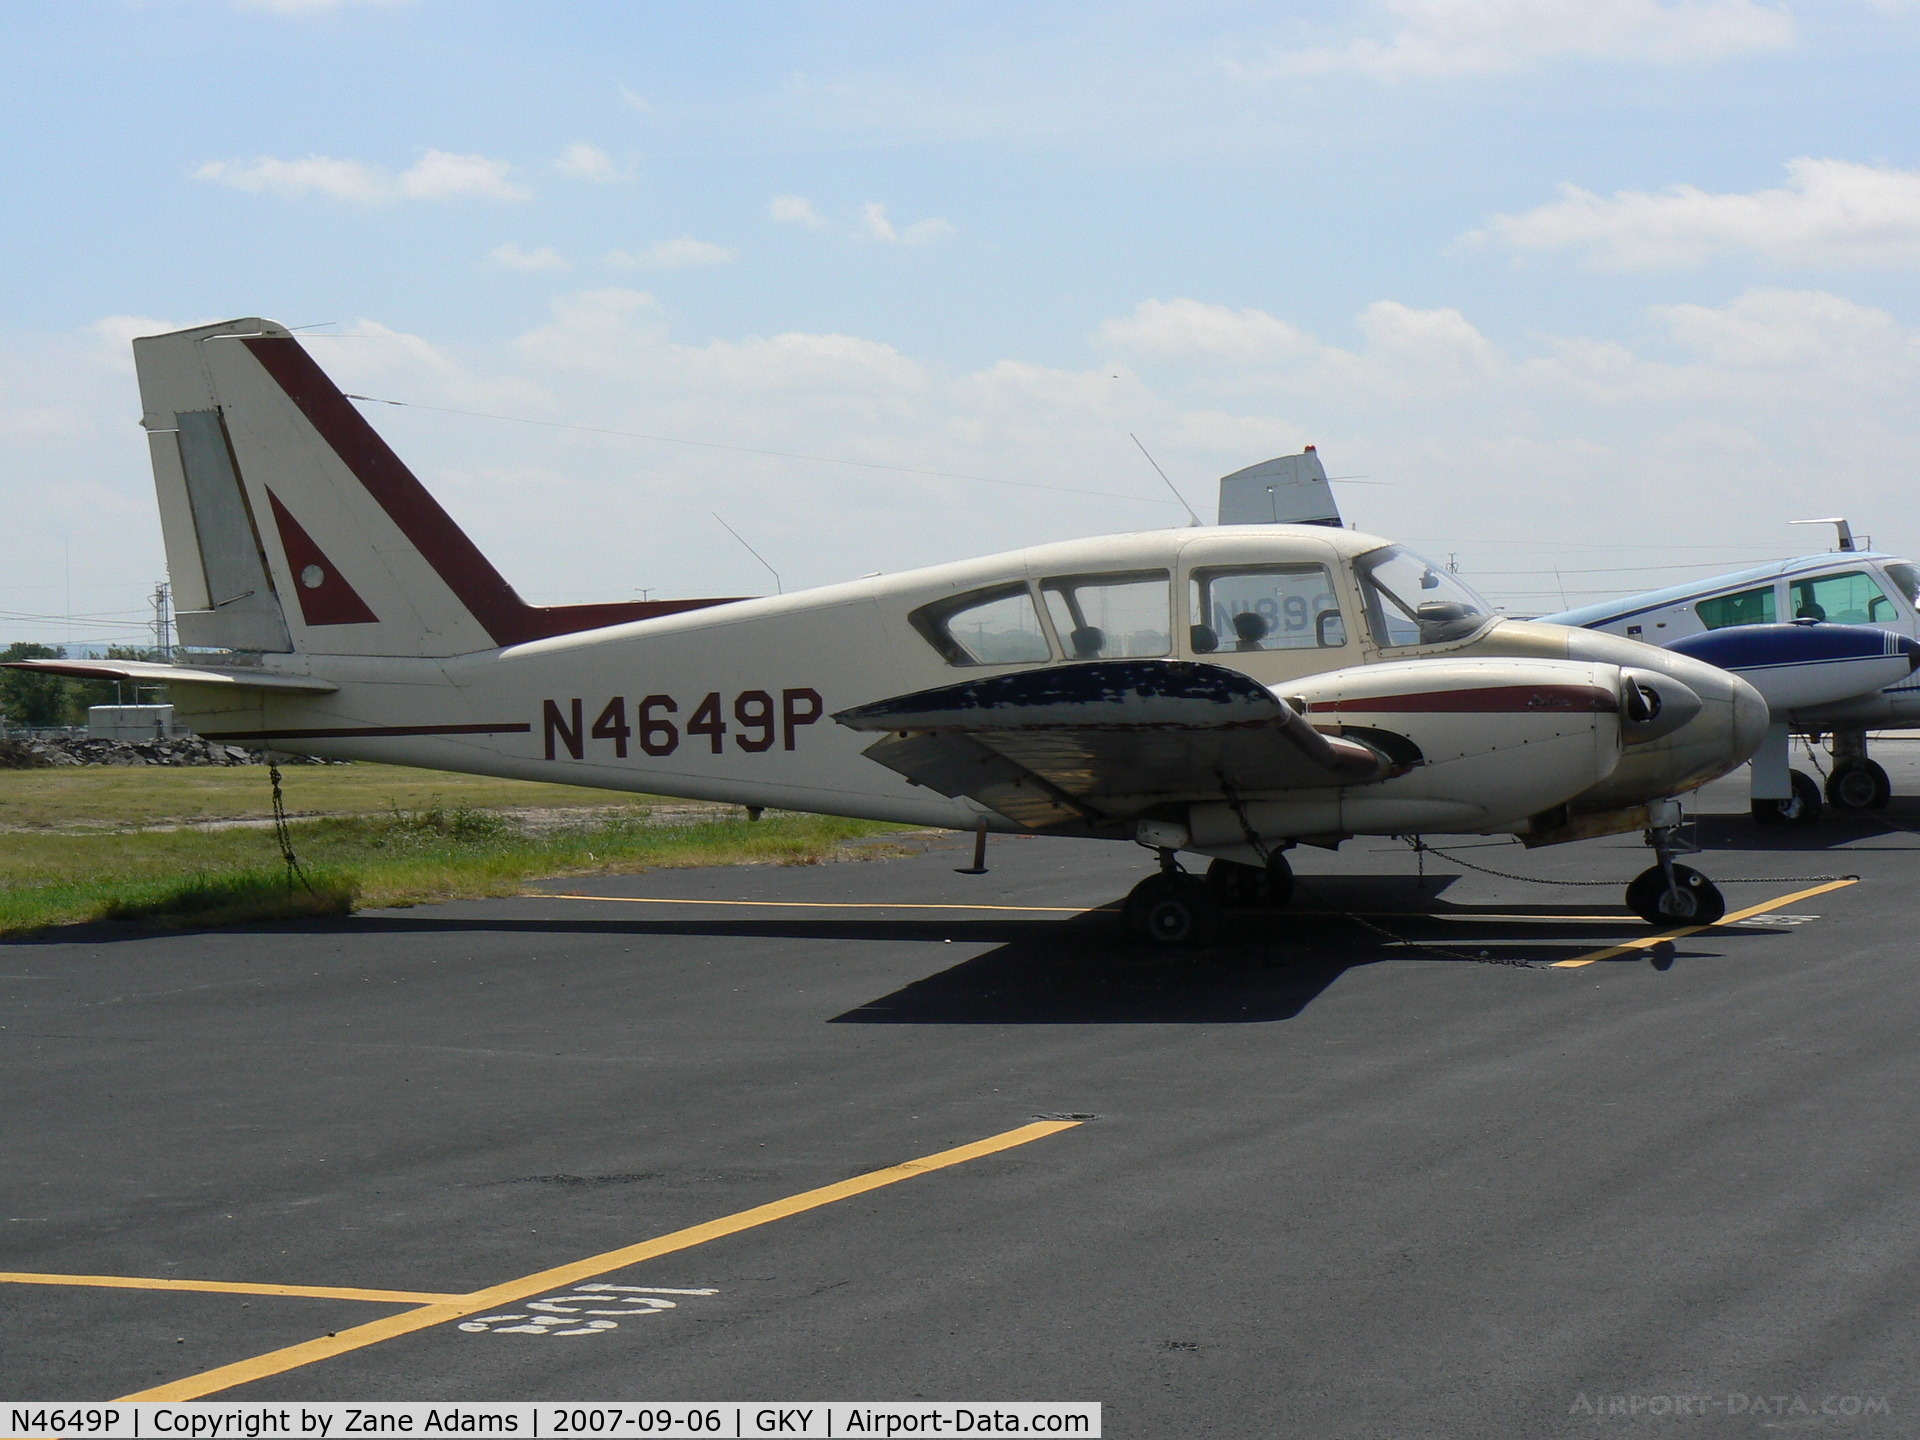 N4649P, 1960 Piper PA-23-250 Aztec C/N 27-171, This airplane has not moved in several years